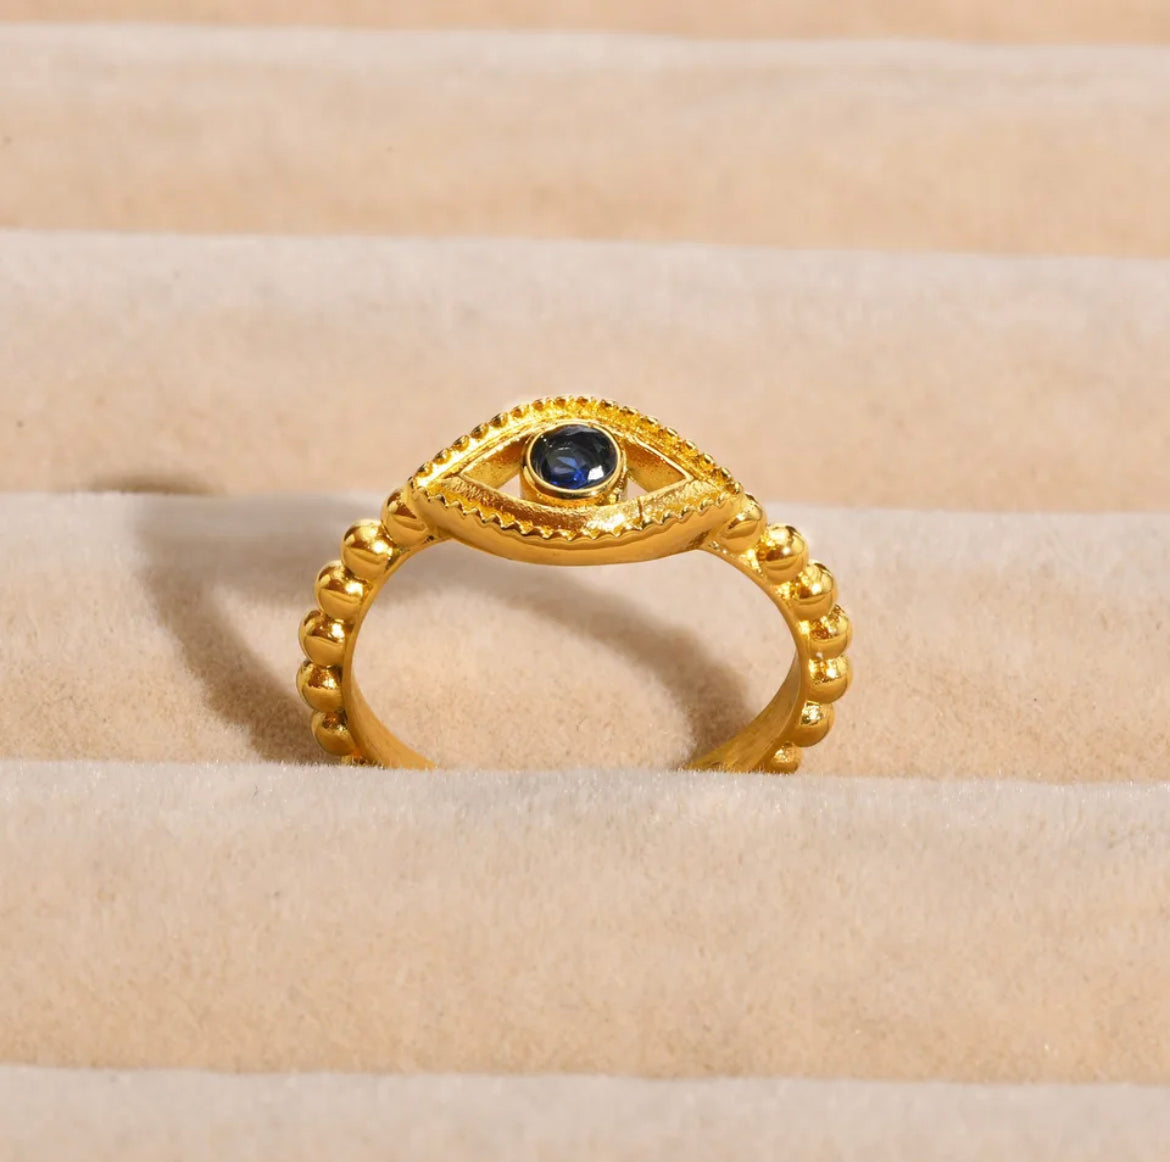 Evil Eye Adjustable Ring, Cubic Zirconia Good Luck Protection